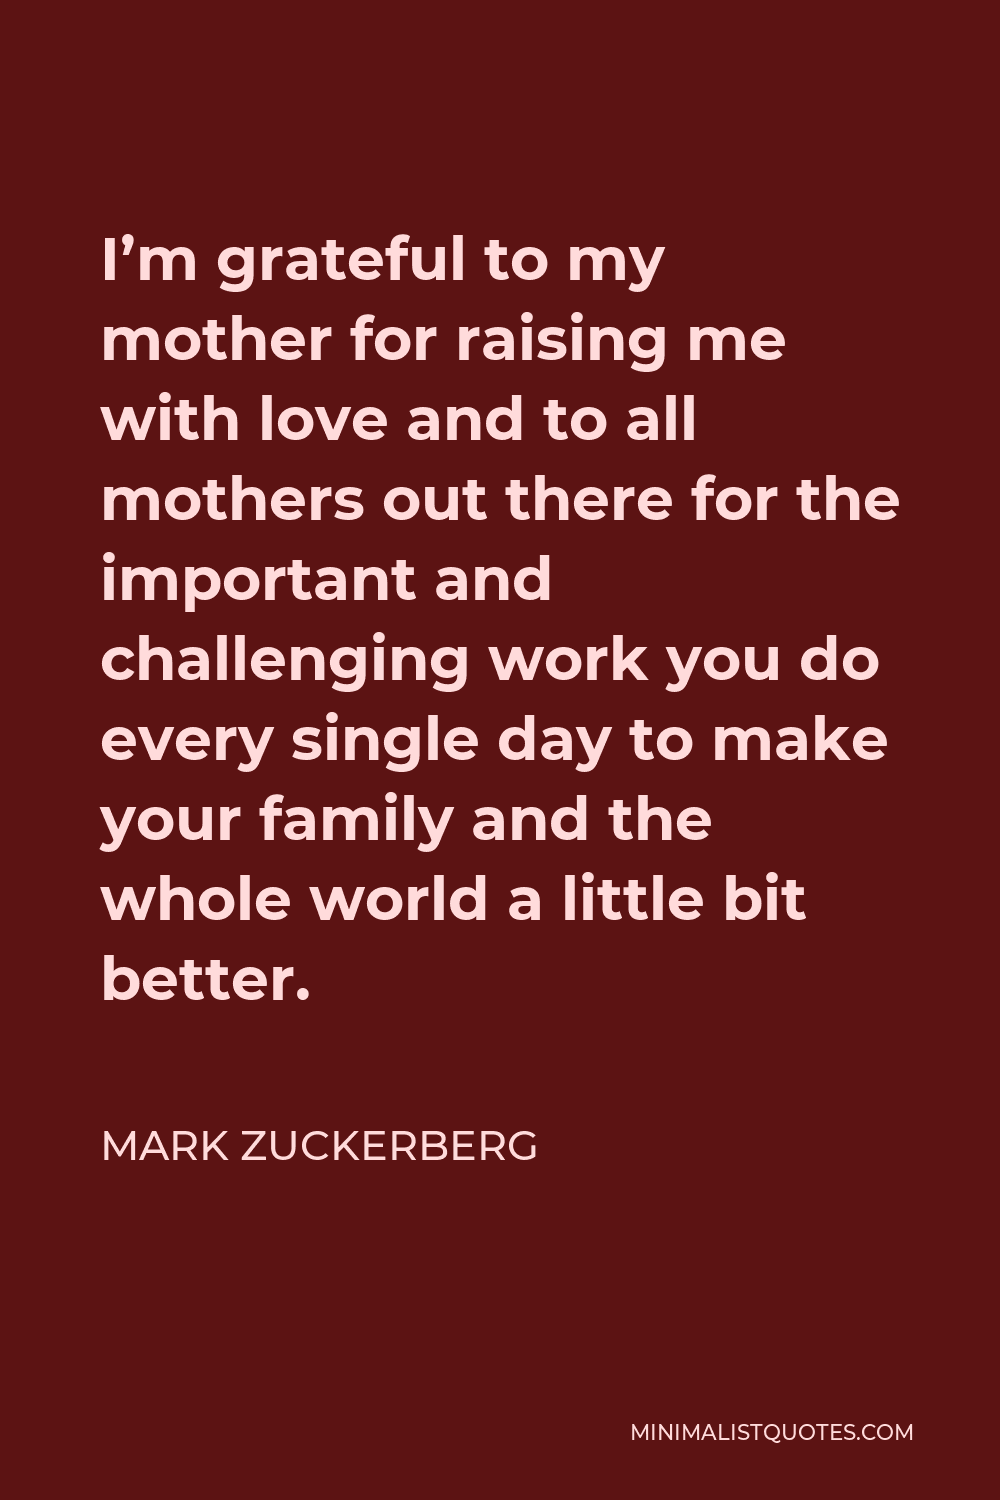 Mark Zuckerberg Quote: I'm grateful to my mother for raising me ...